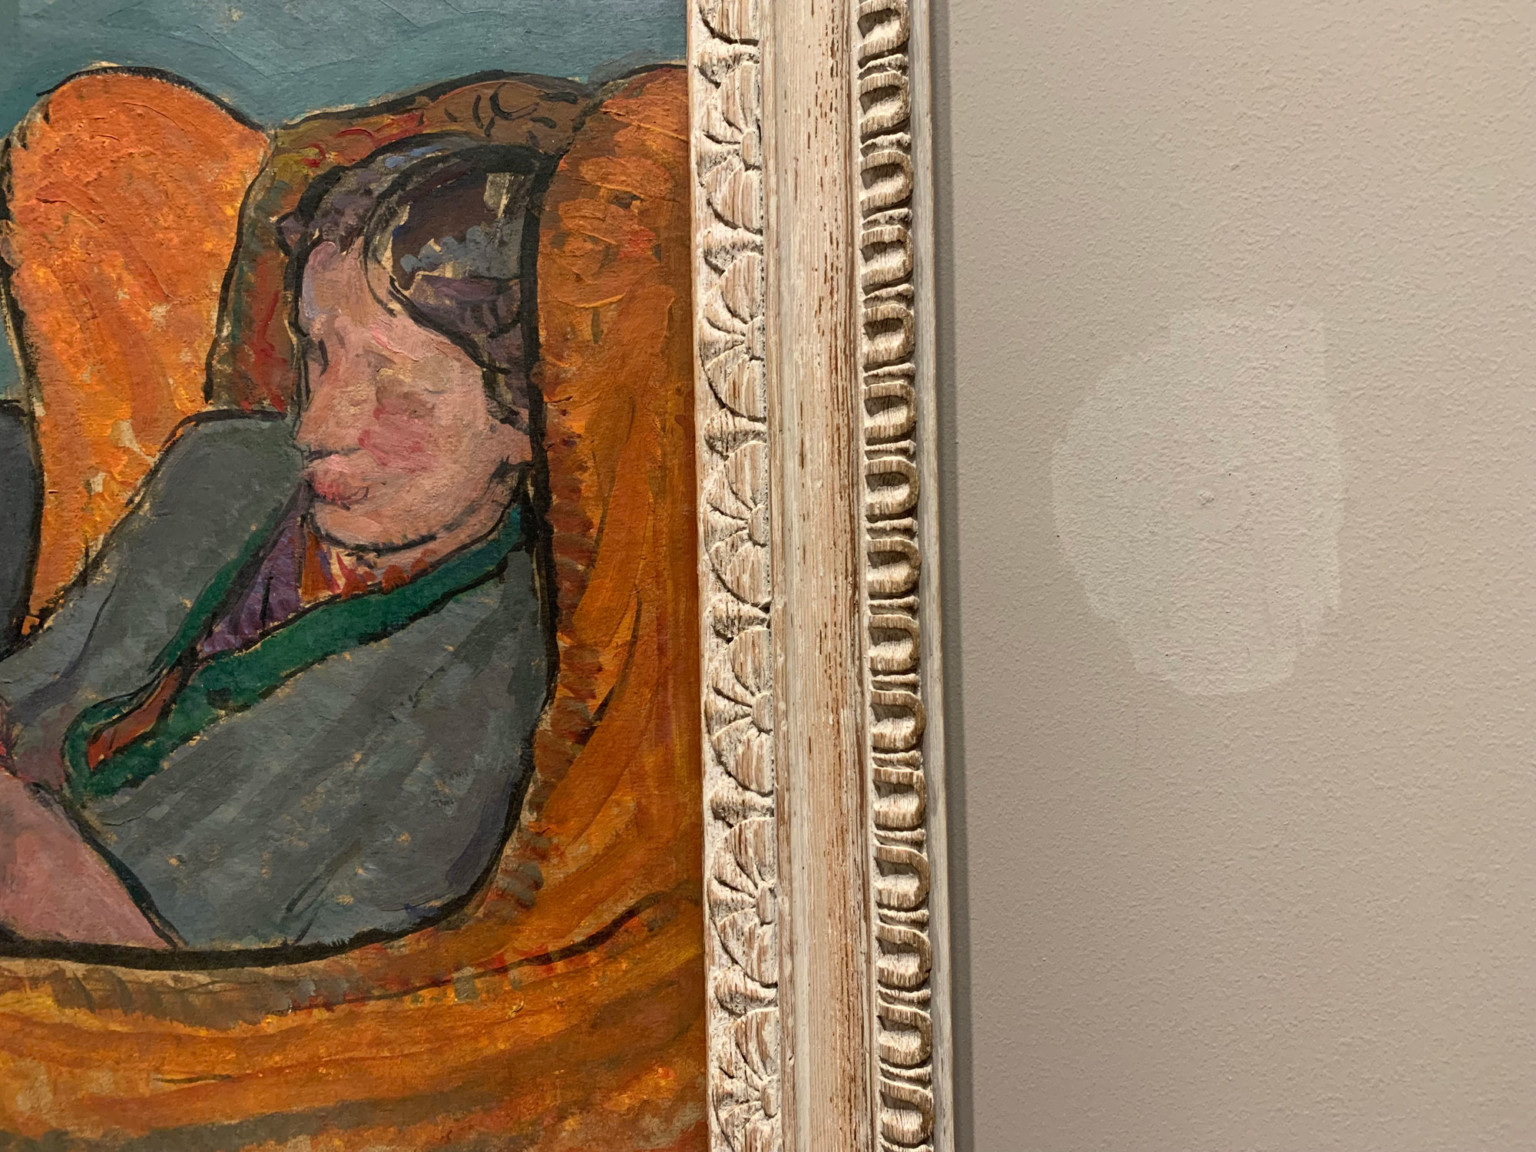 Vanessa Bell's Virginia Woolf, and patched up hole. 